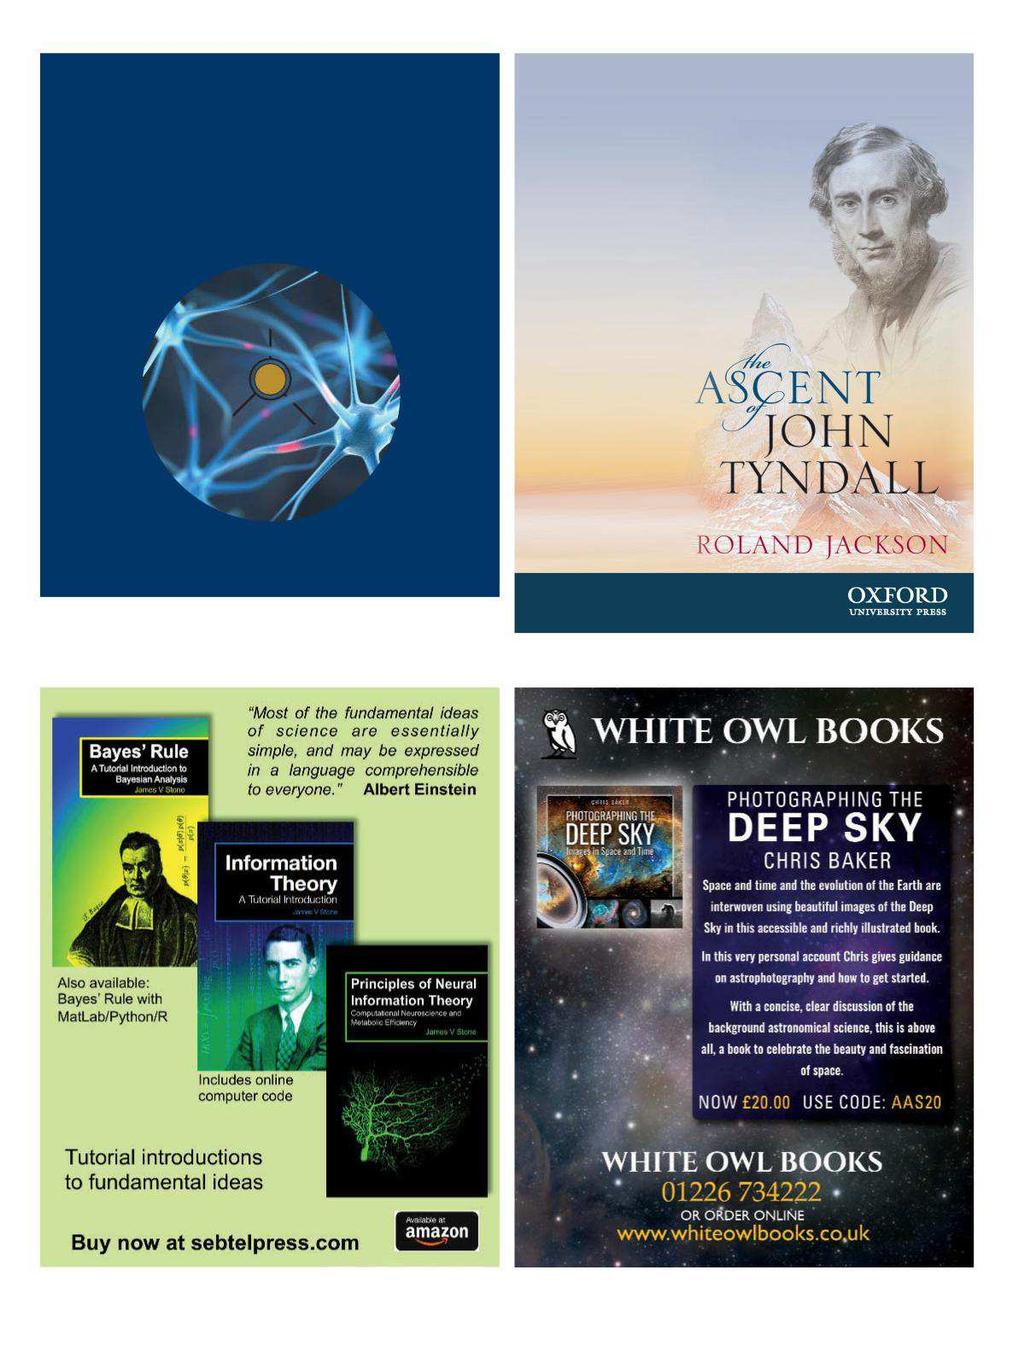 THE UNIVERSAL UNITS OF THE MIND HOW A SIMPLE DATA MODULE UNDERLIES ALL OUR THOUGHTS AND PERCEPTIONS SUMMER READING One of the foremost physicists of mid-victorian Britain, John Tyndall s contribution